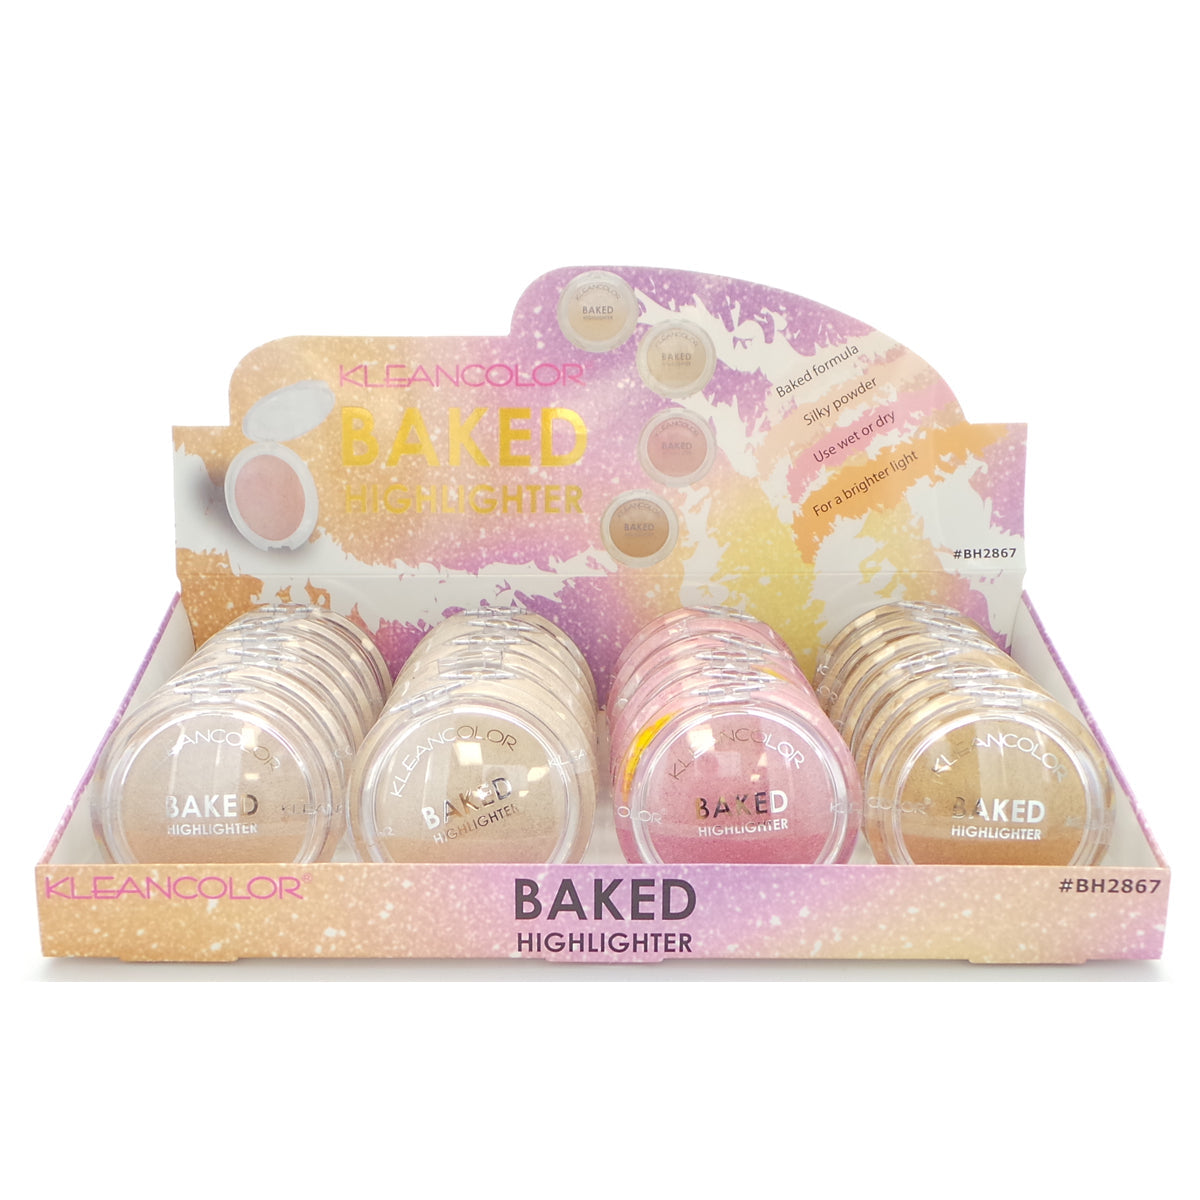 KLEANCOLOR Baked Highlighter 2867 Display Set, 24 Pieces